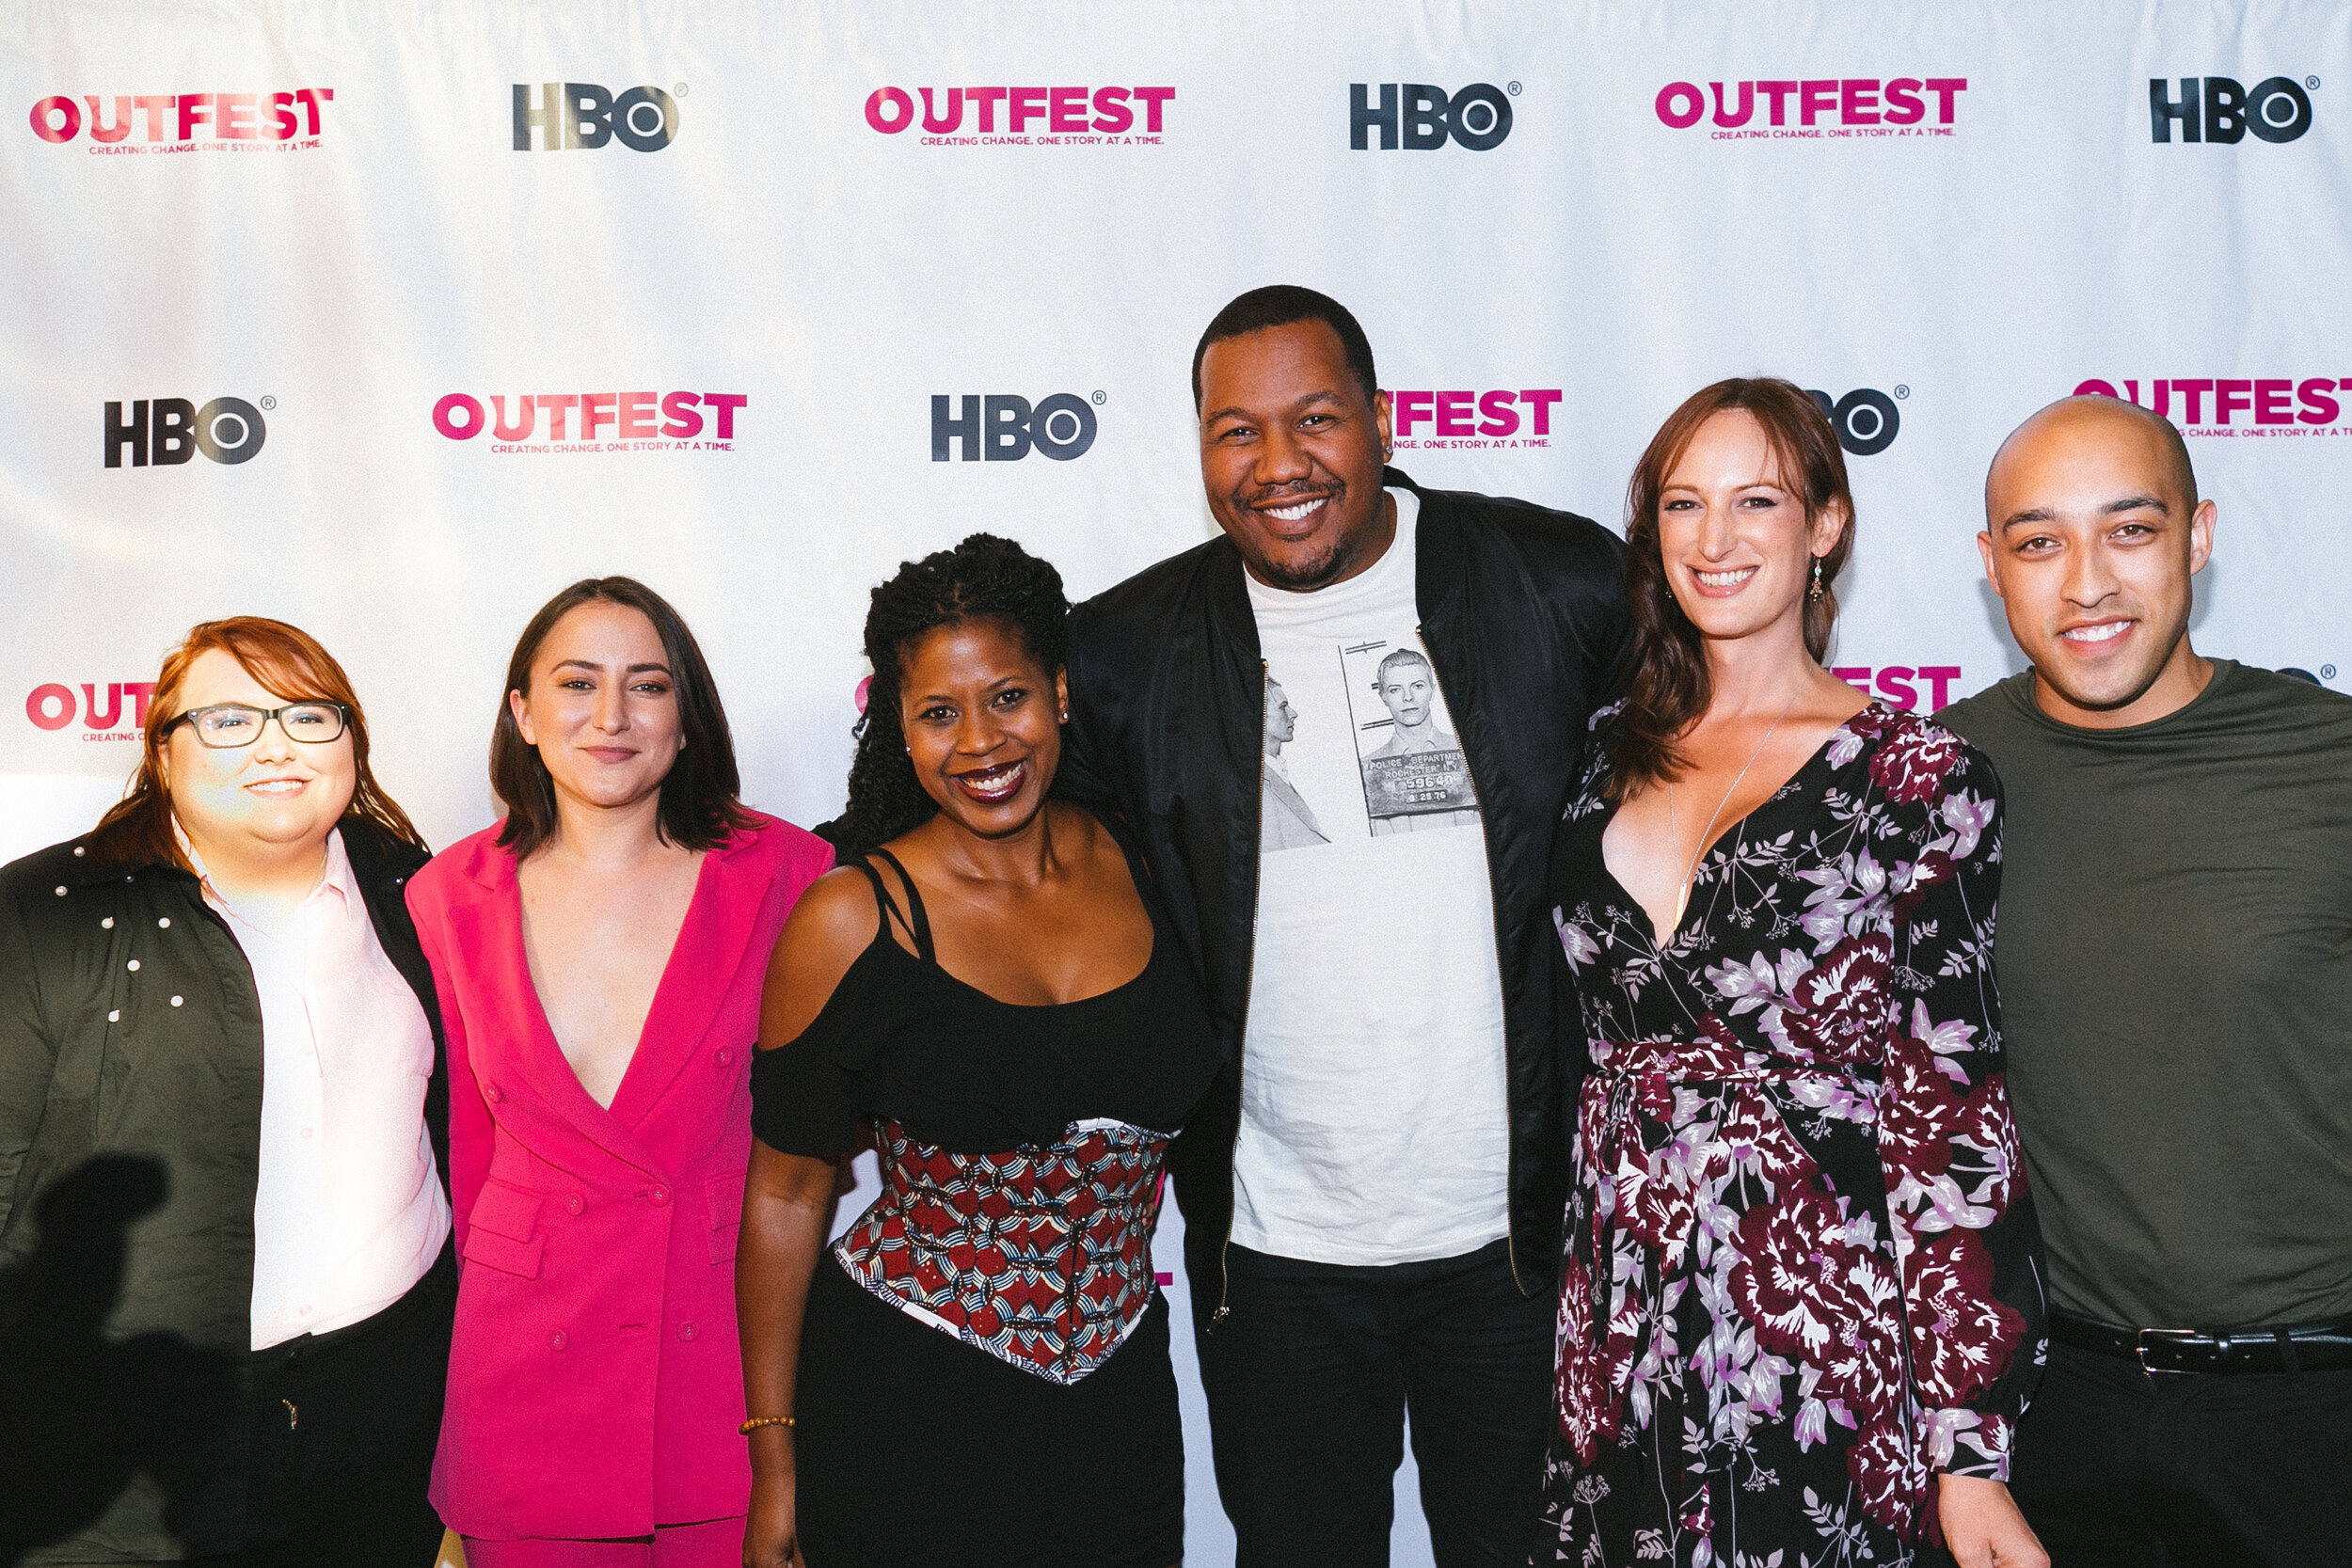 OUTFEST071518_Andy_09065.jpg